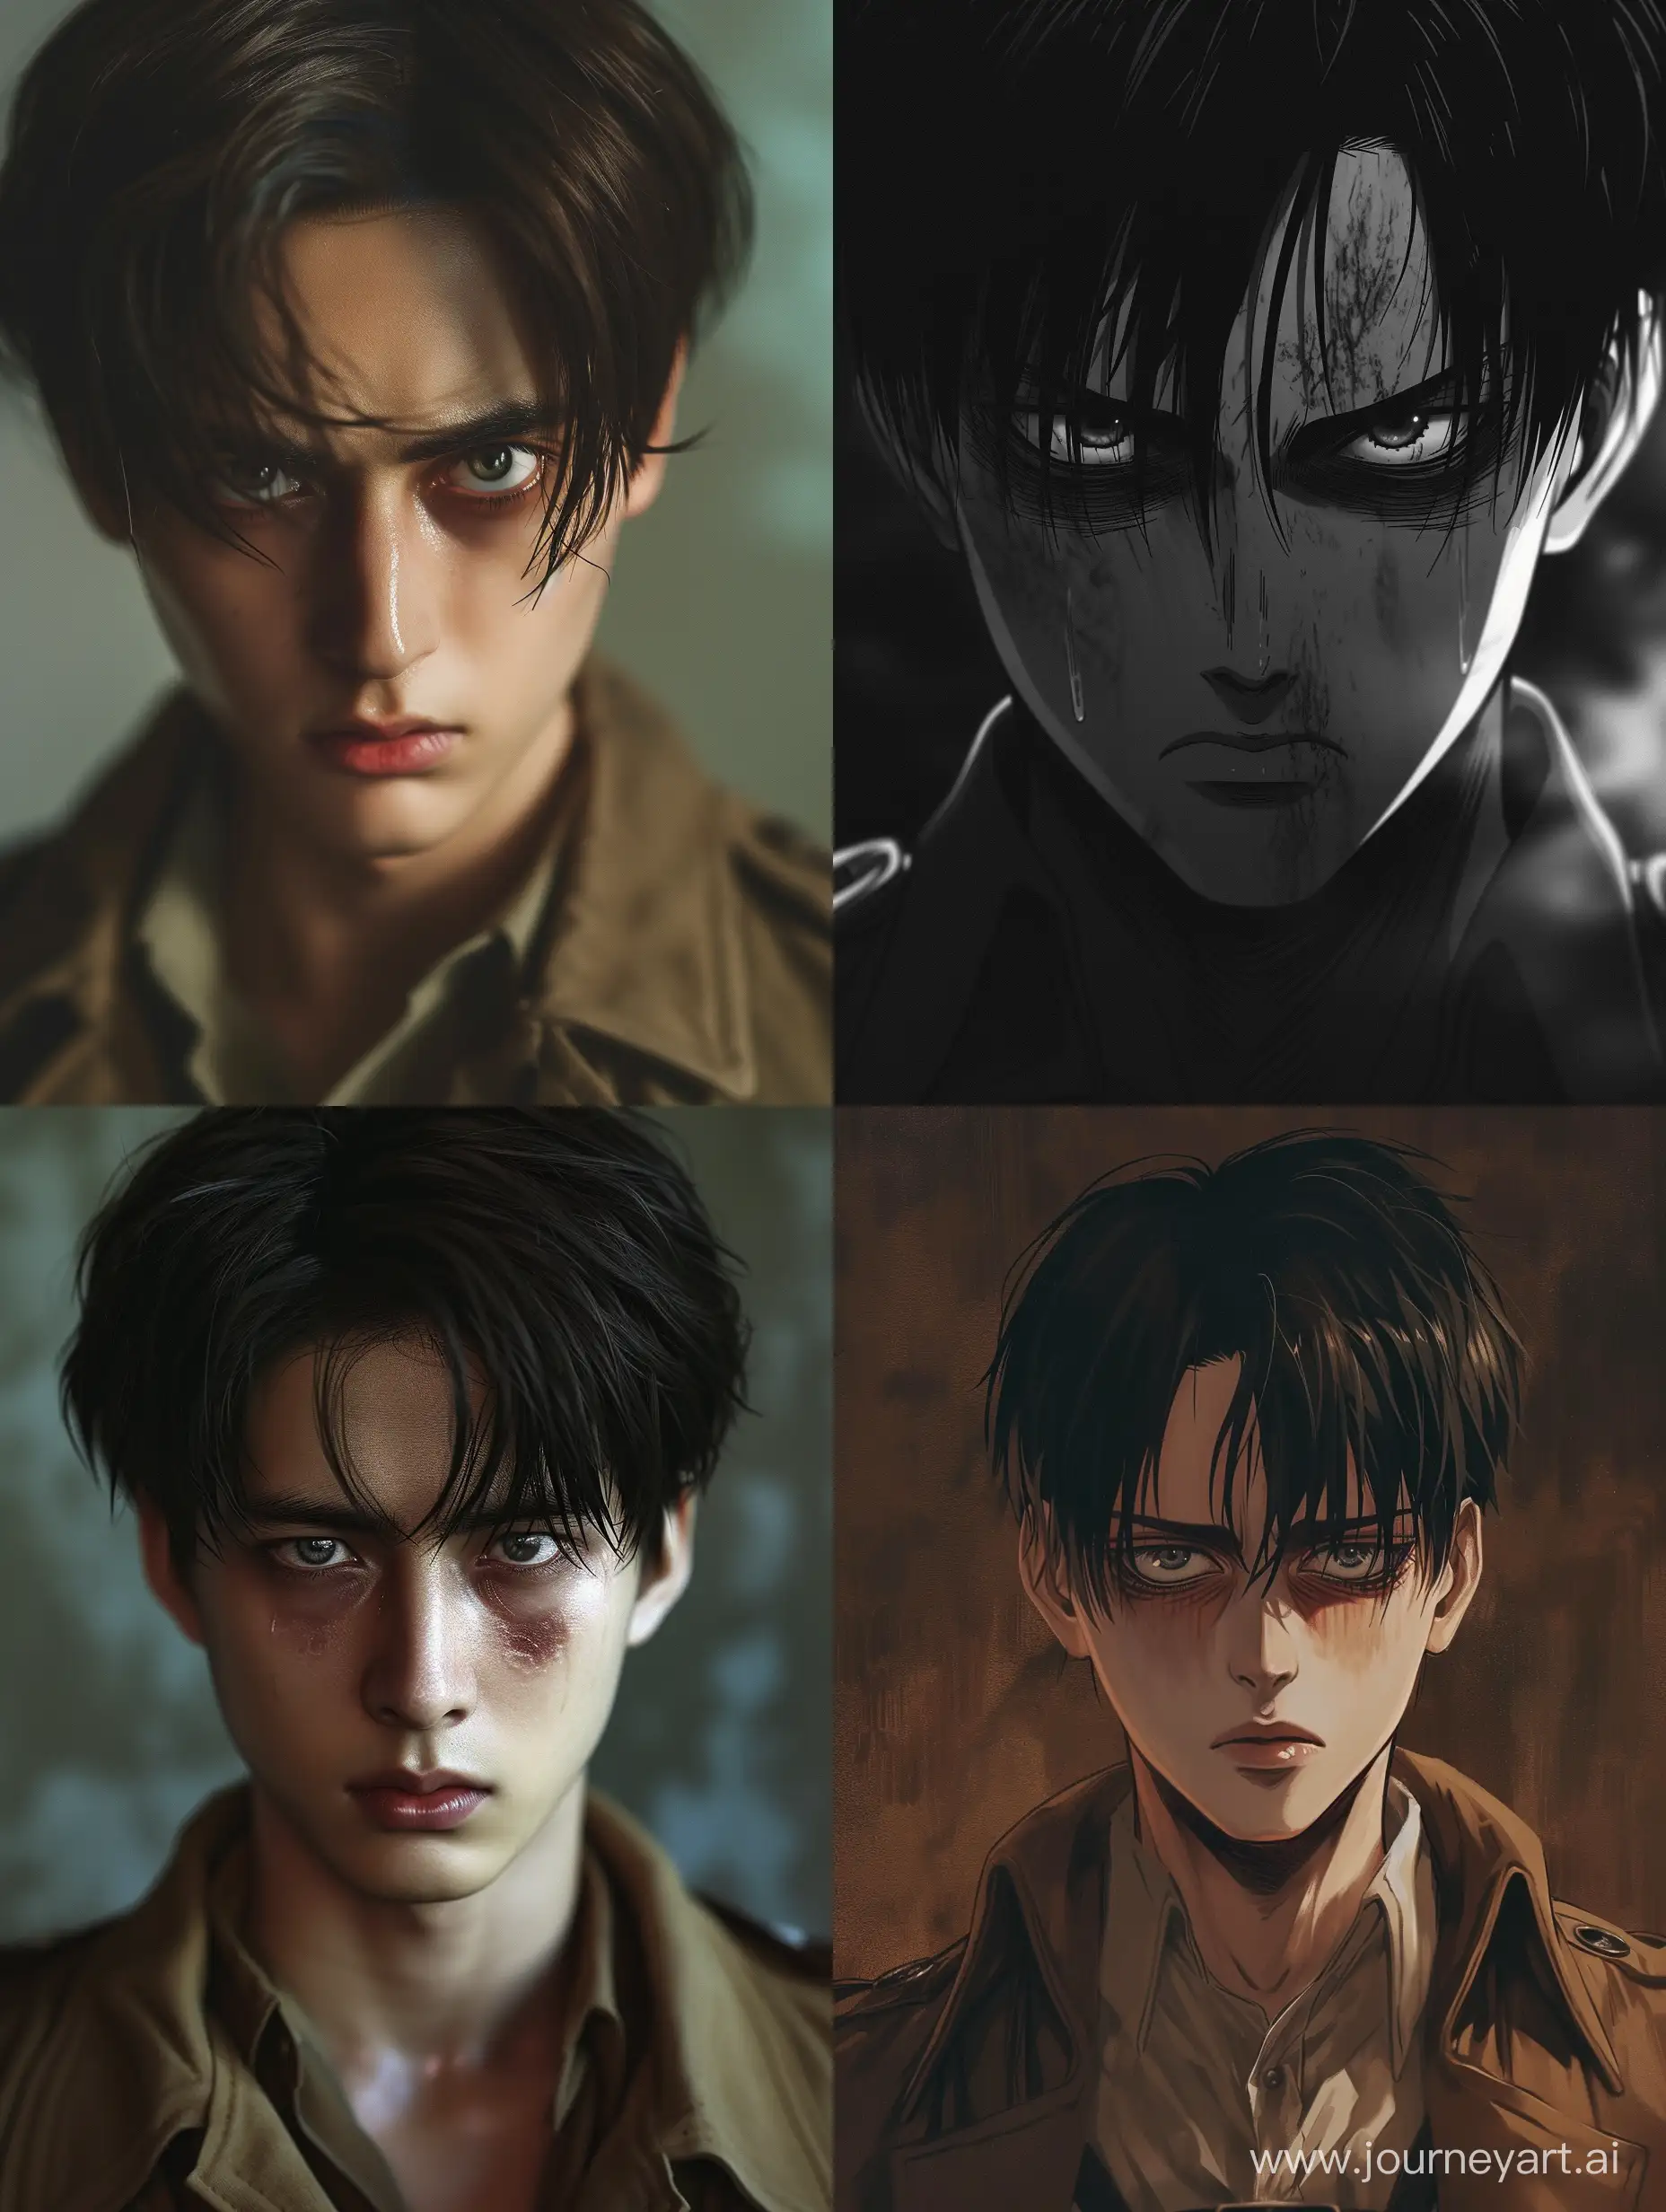 Photographic Levi Ackerman from Attack on Titan, in his 30s, with normal dark circles, slight mocking smirk, narrow bored eyes with prominent whites, high lids